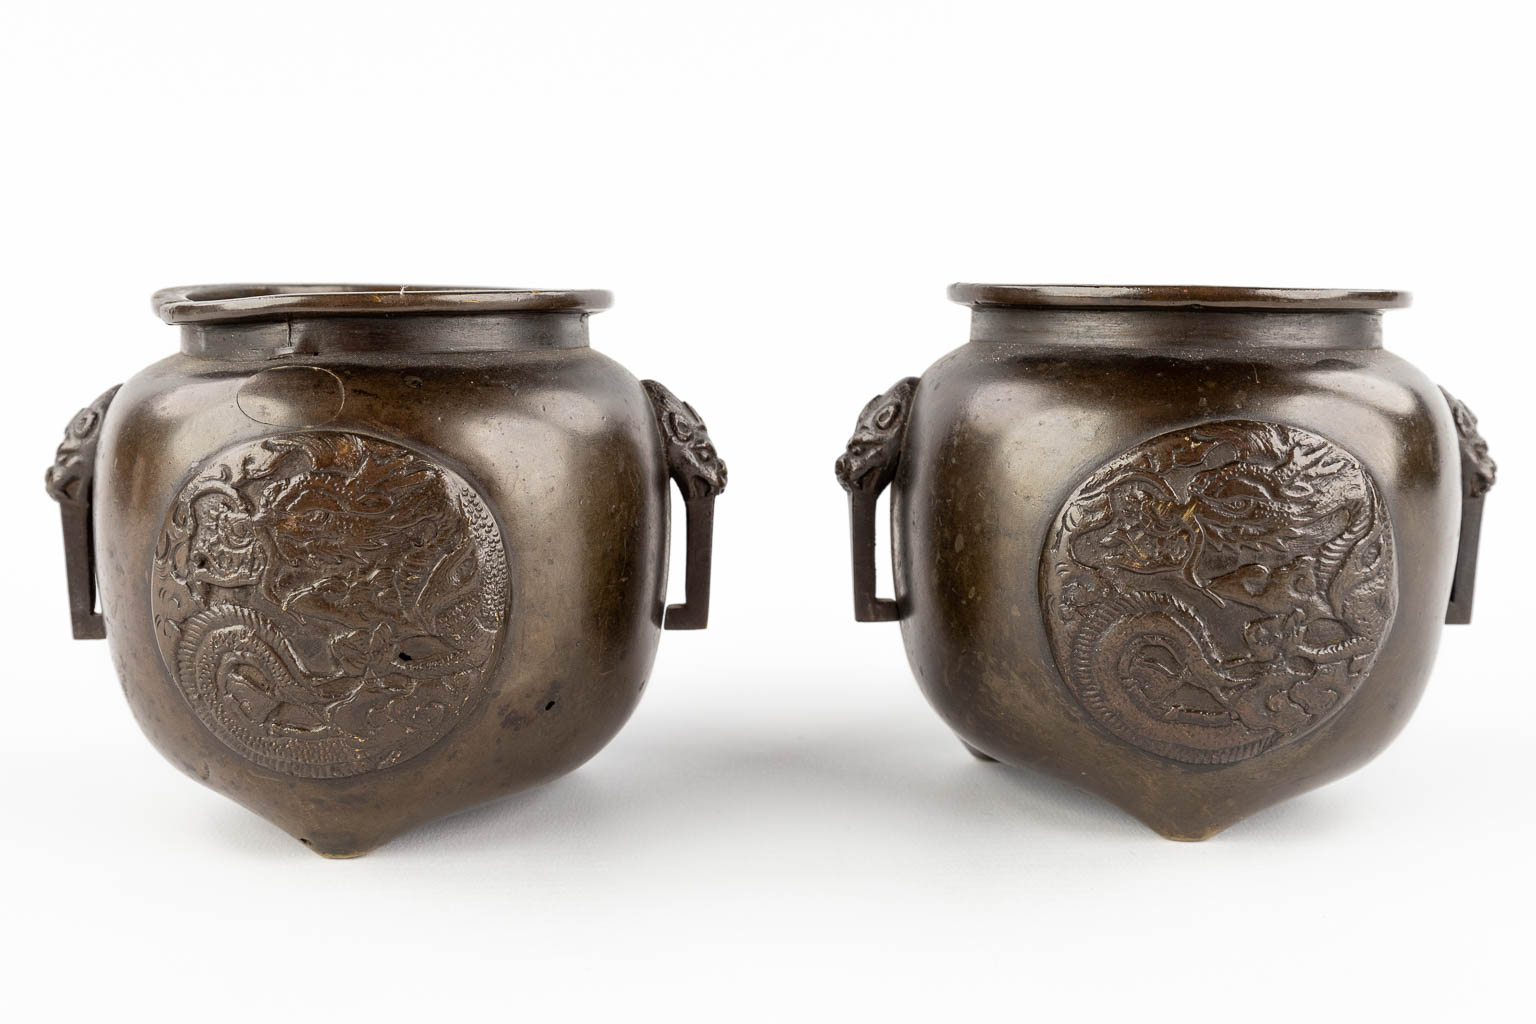 A pair of Chinese bronze brûle parfum with dragon and phoenix decor. Patinated bronze. 19th/20th C. (D:12 x W:13,5 x H:10,5 cm)